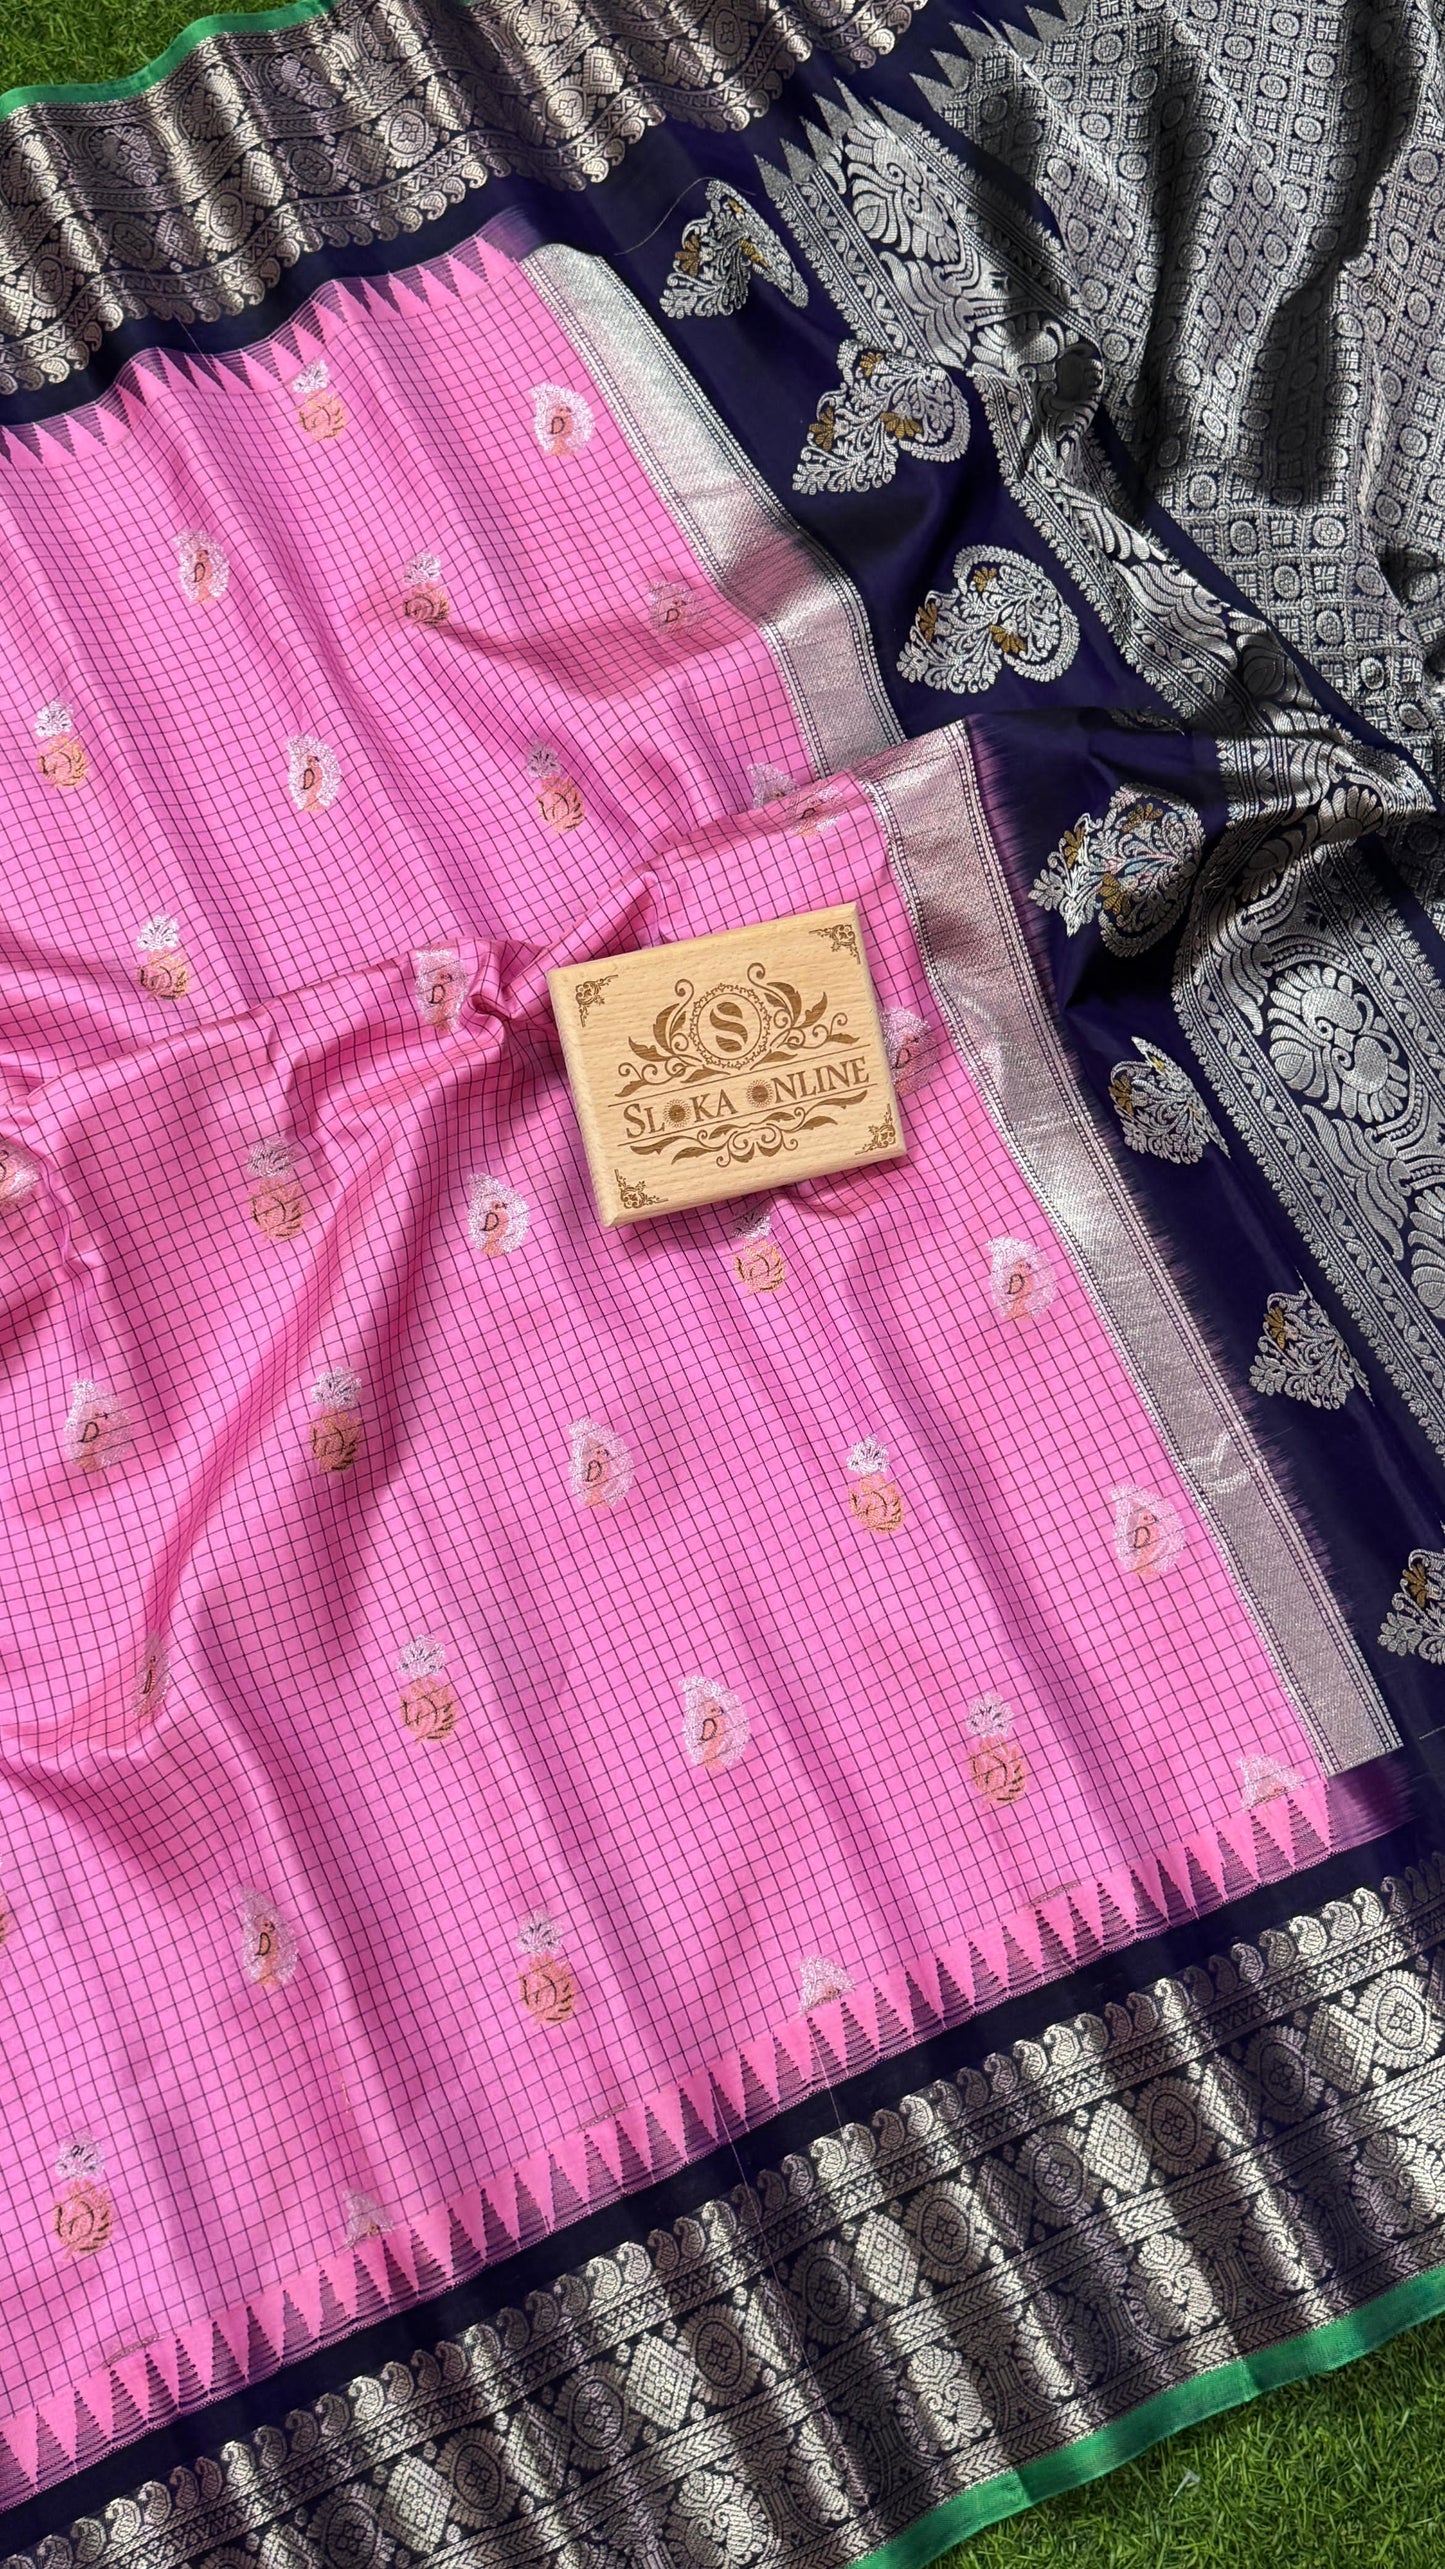 Premium Quality festive Traditional Collection of Pure Gadwal Pattu Sarees